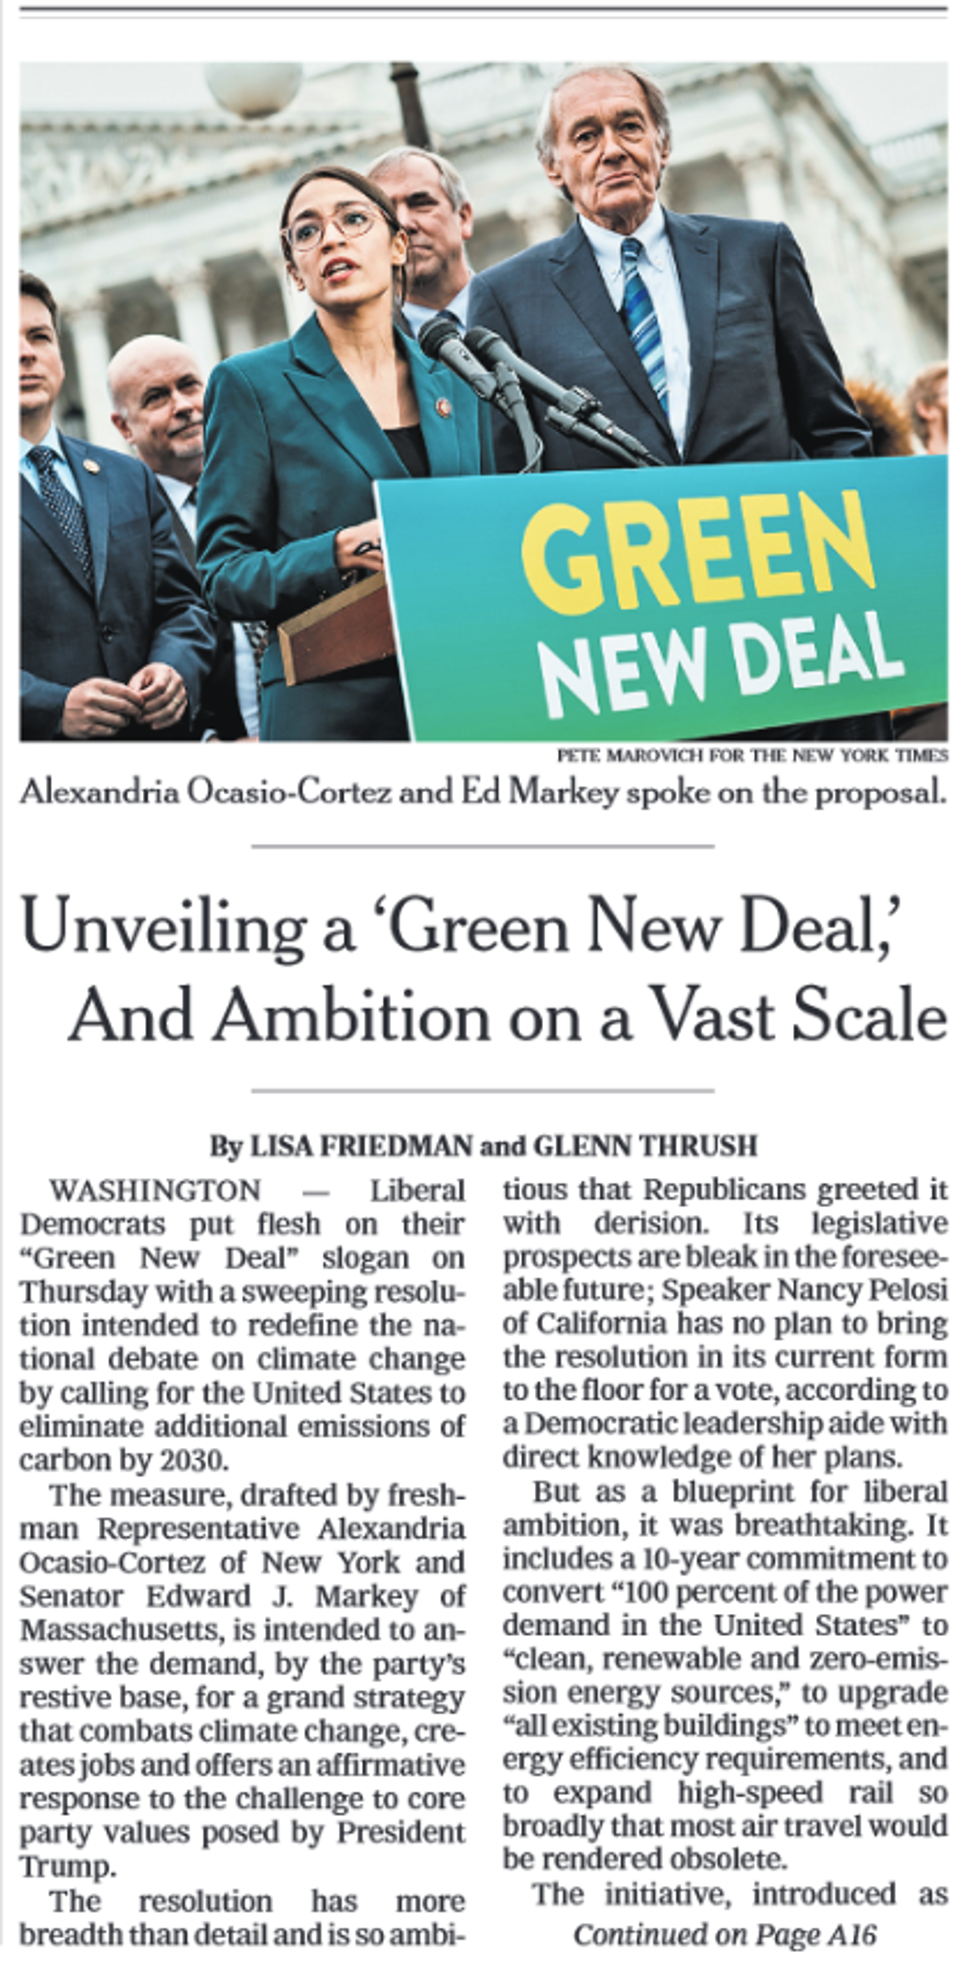 NYT: Unveiling a 'Green New Deal,' and Ambition on a Vast Scale